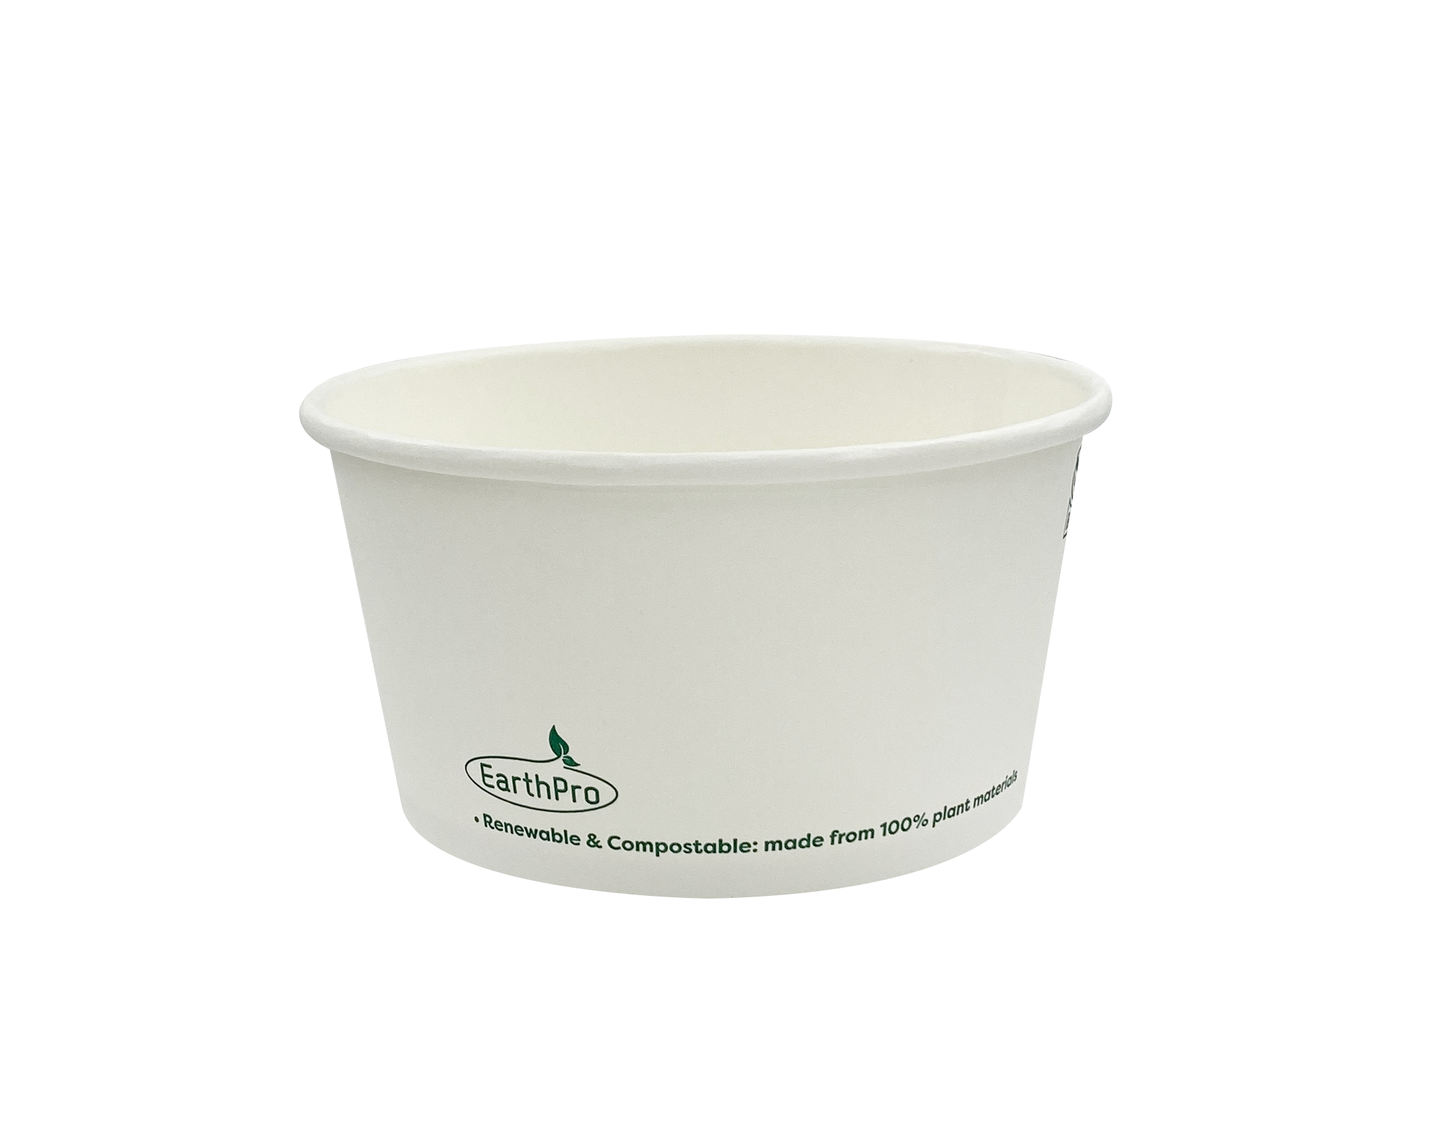 120-600-006 Soup/Food Cup EarthPro 6oz. Compostable White Paper, Stock Print